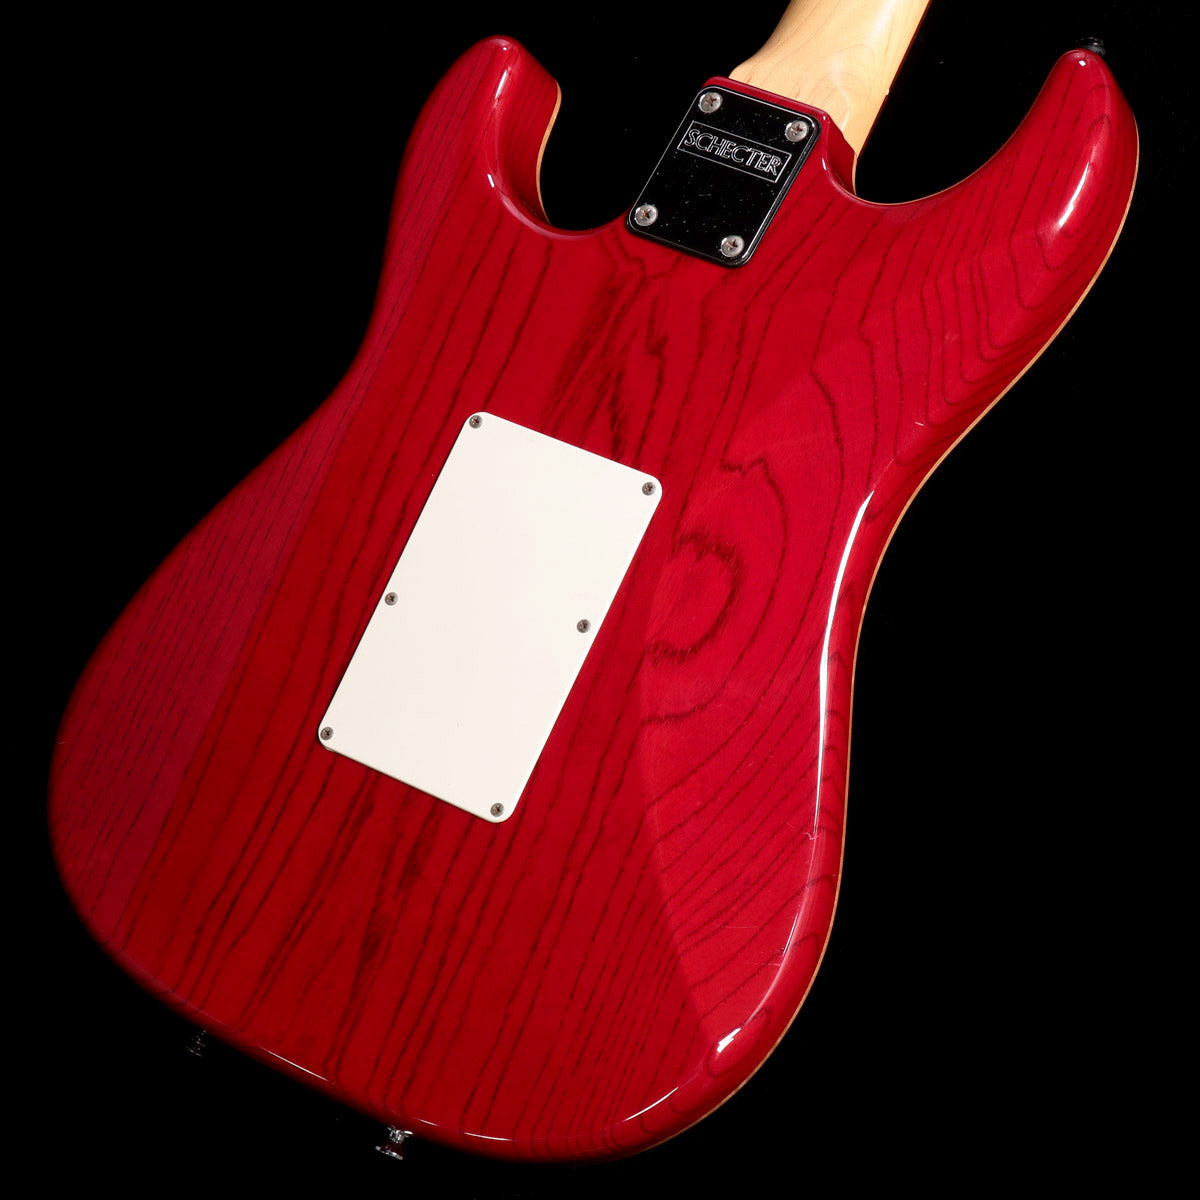 [SN 080205] USED SCHECTER / EX-V-22-CTM-FRT Black Cherry (Made in Japan) [3.79kg] Schecter Electric Guitar [08]